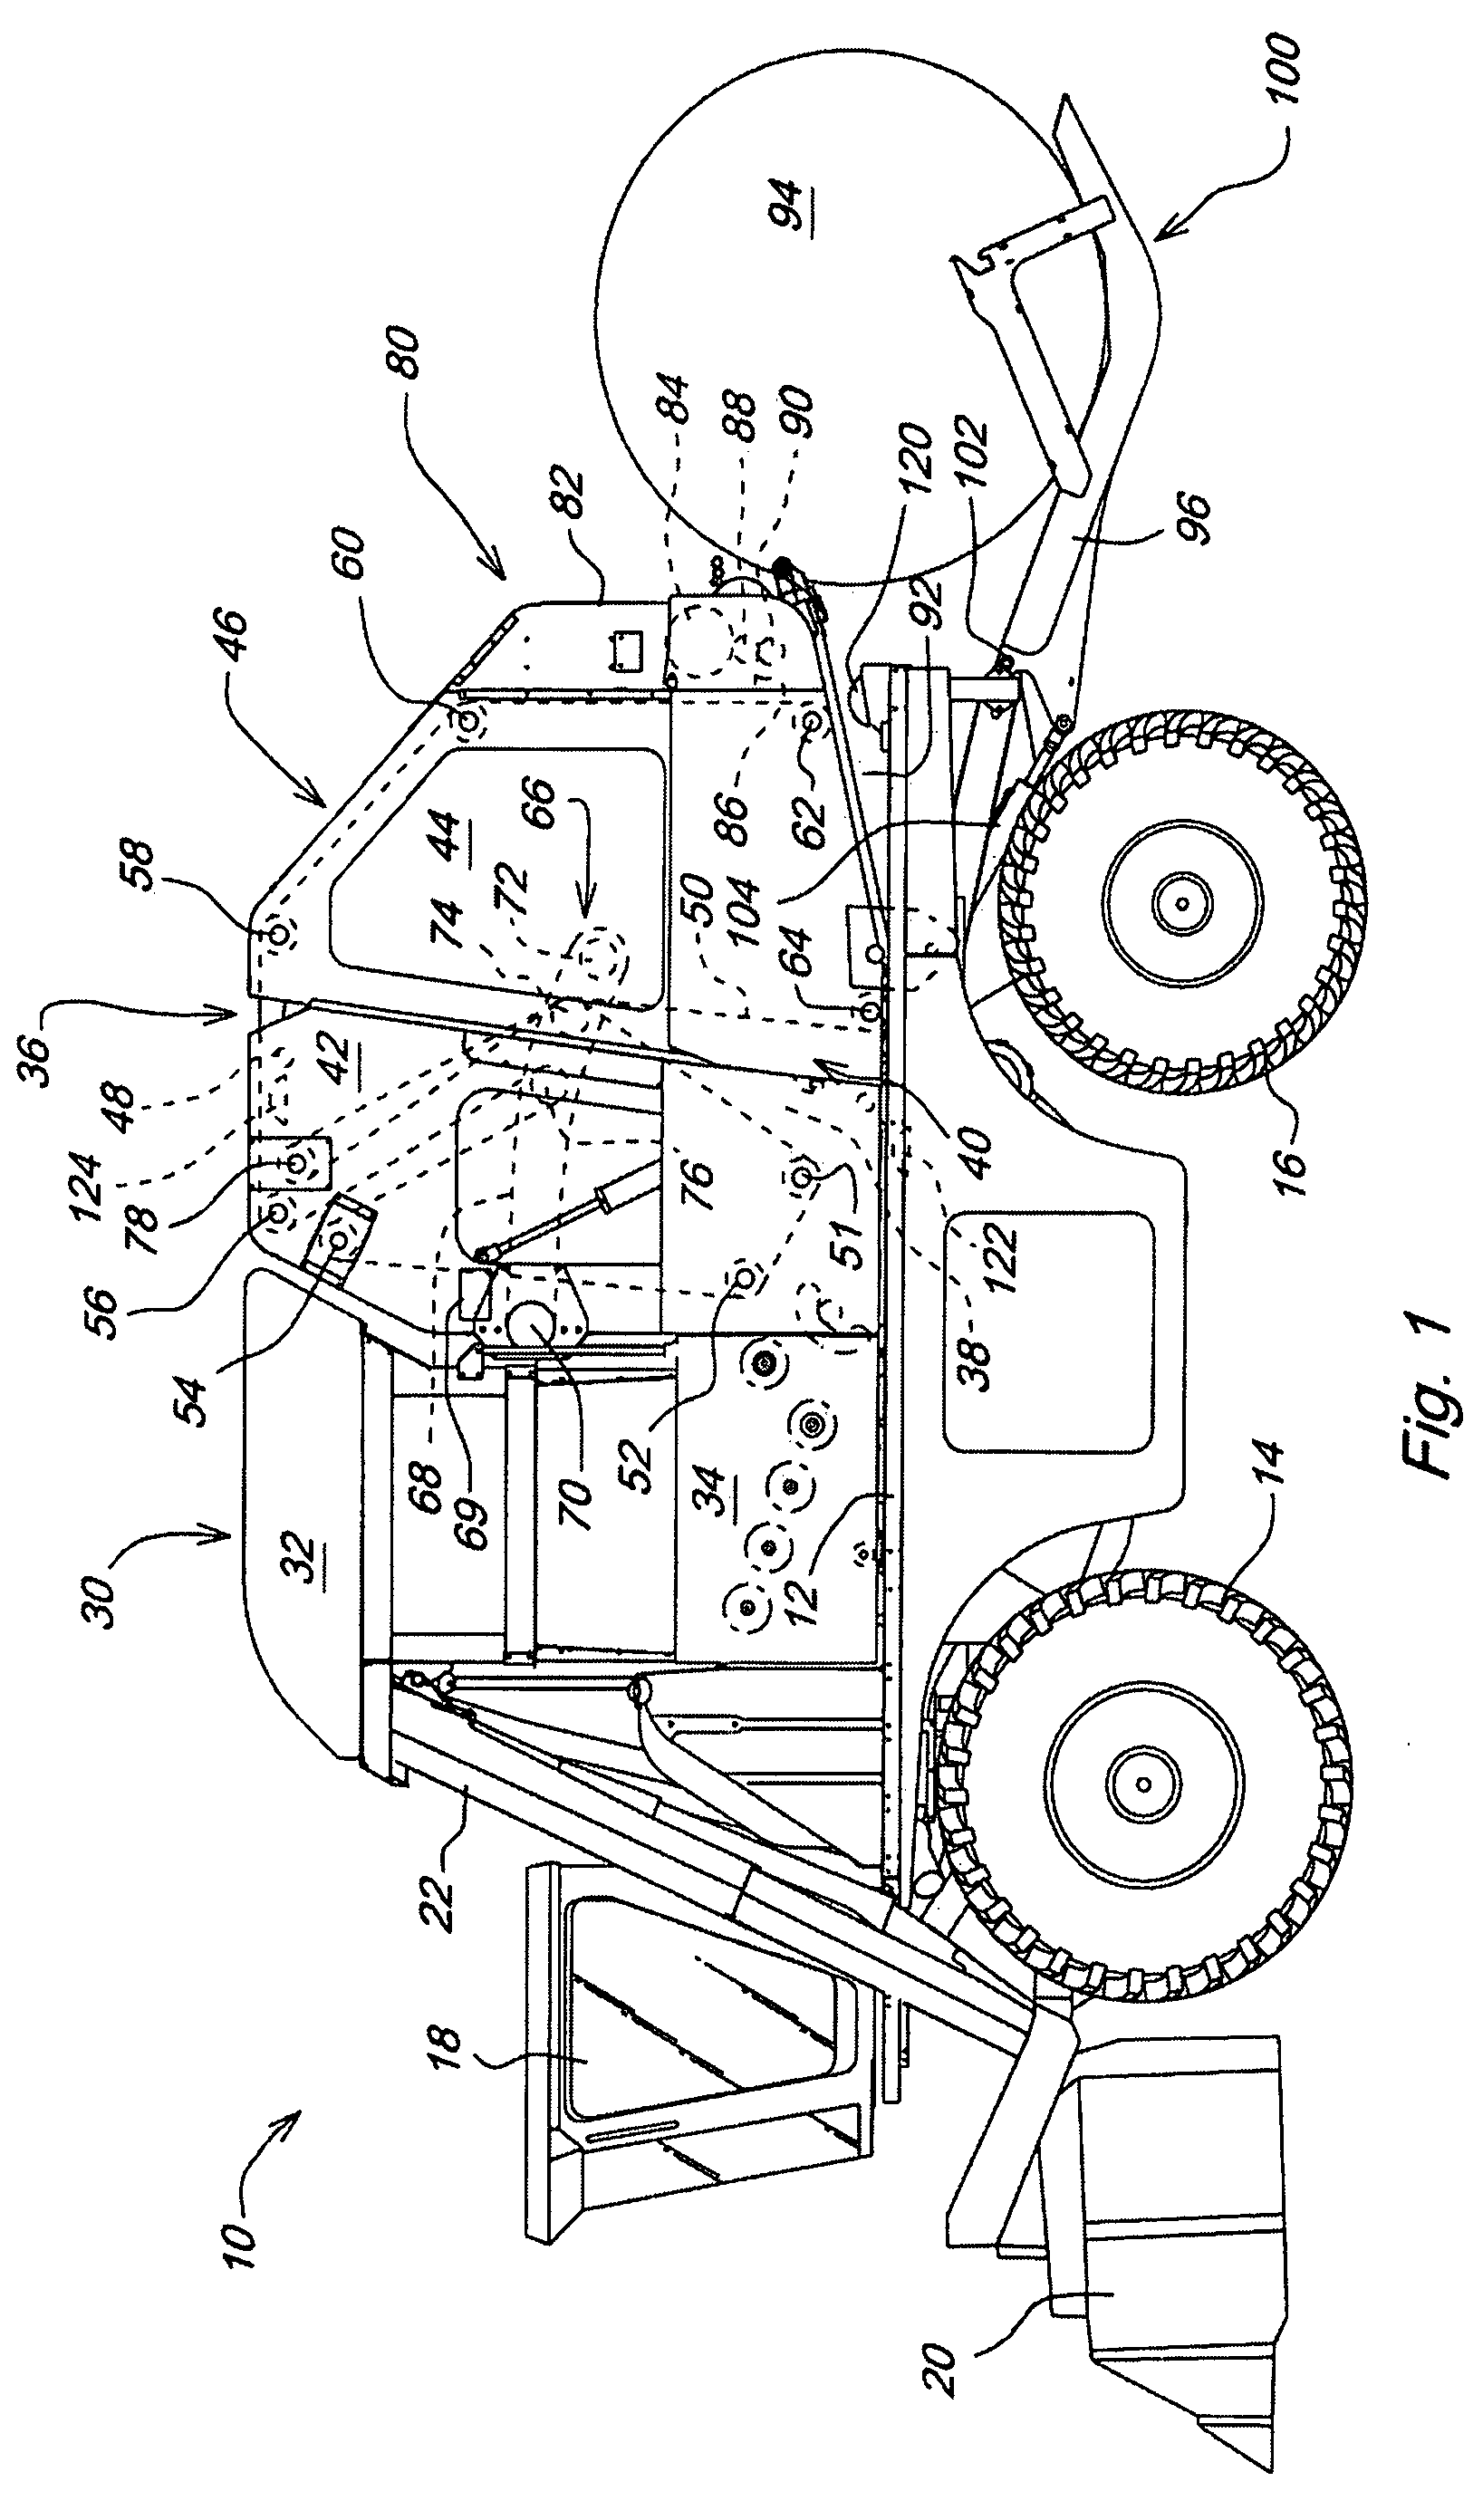 Cotton harvester for producing modules which can be automatically identified and oriented